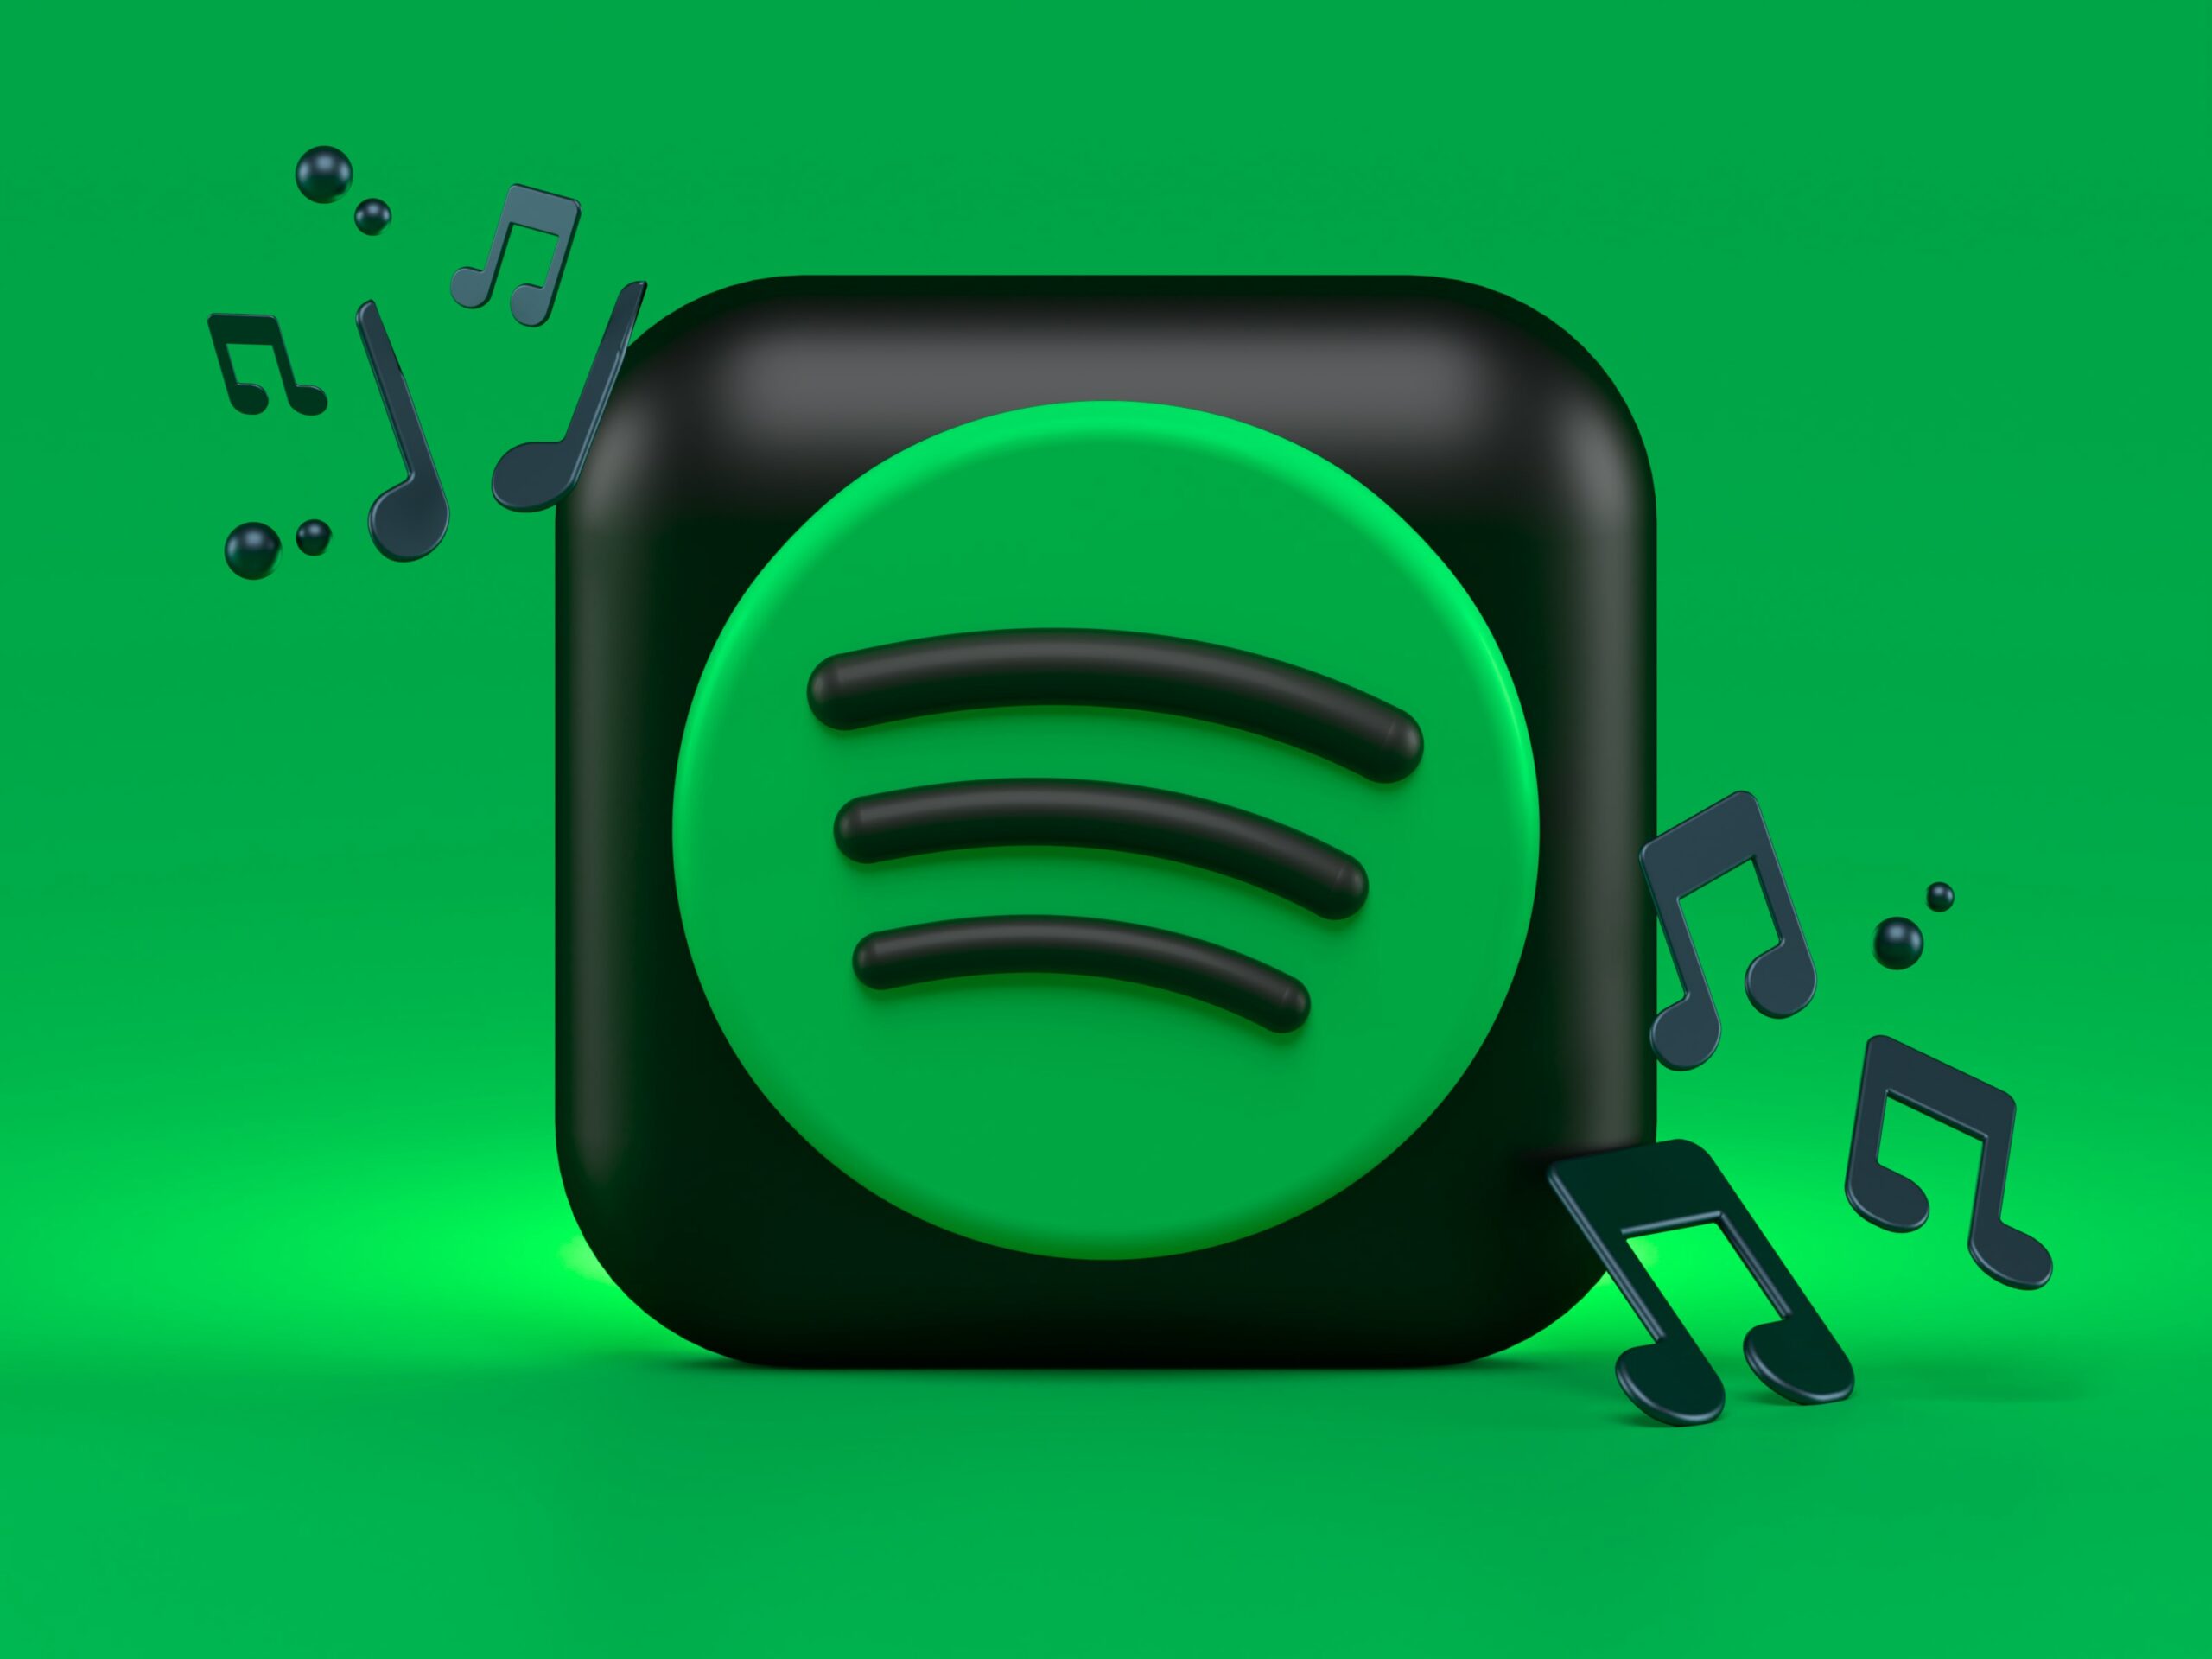 Music Week on X: Spotify enters the @Roblox metaverse with launch